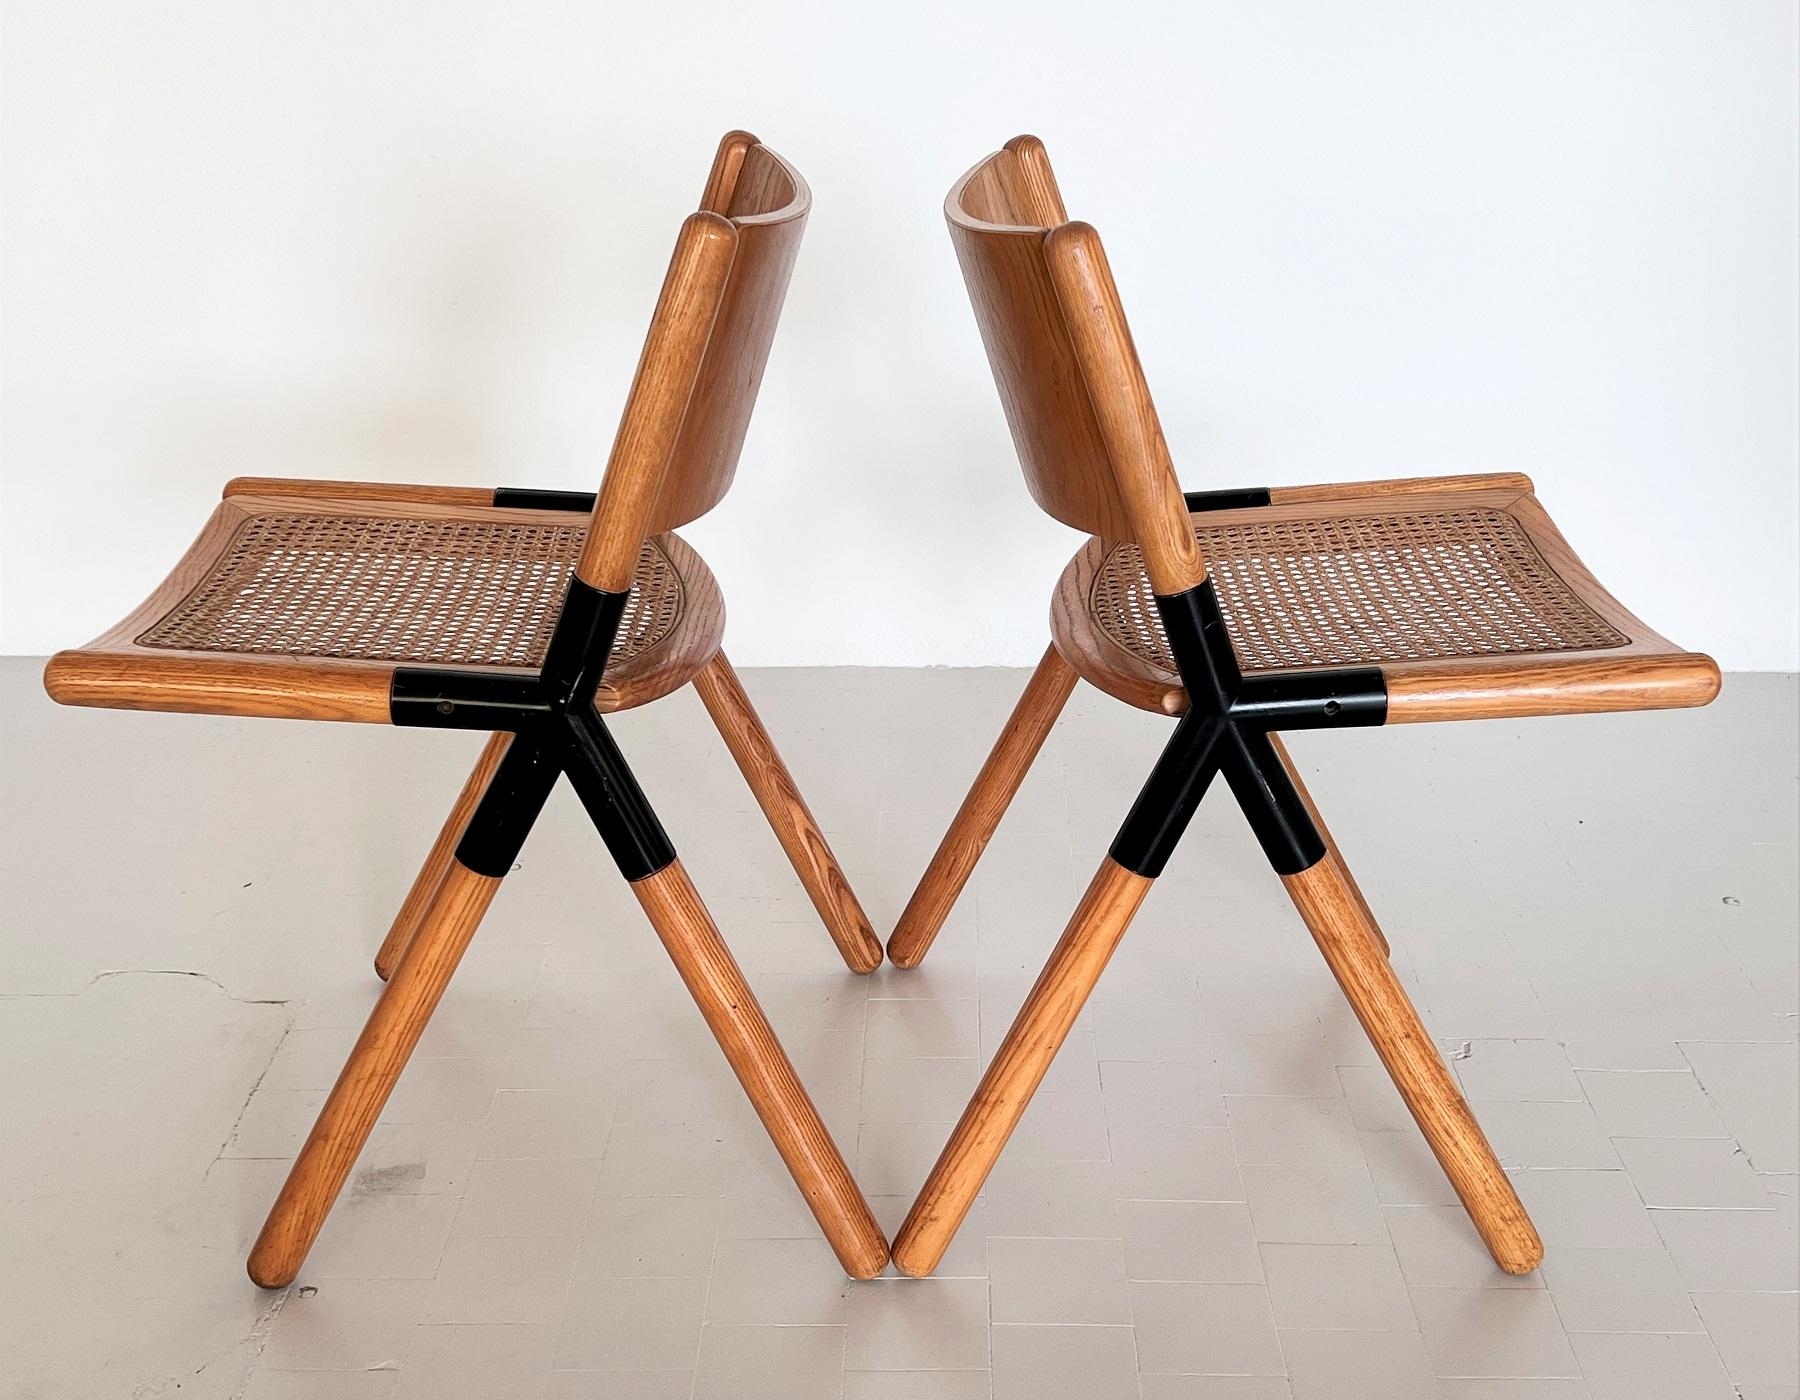 Italian Midcentury Chairs in Oak and Rattan by Mauro Pasquinelli, 1975 For Sale 2